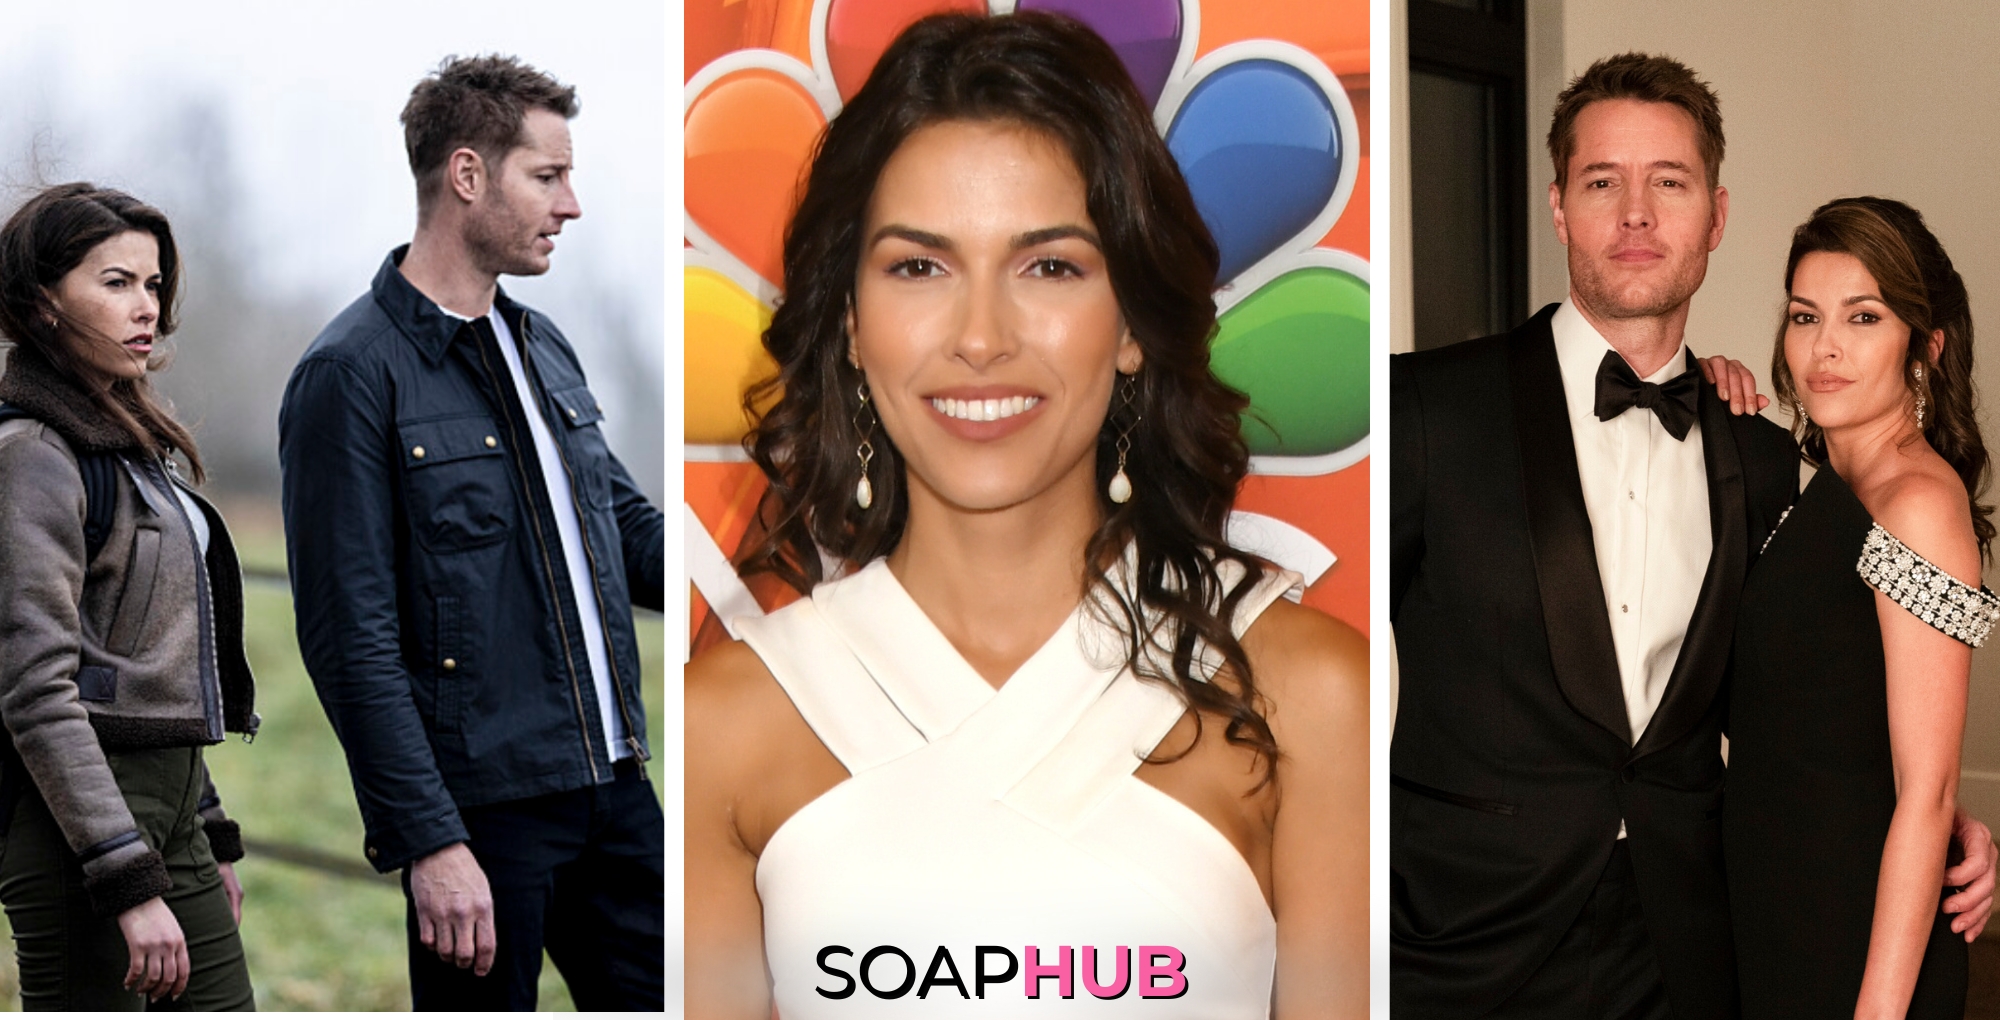 Sofia Pernas and Justin Hartley reunite on Tracker with the Soap Hub logo at the boittom.